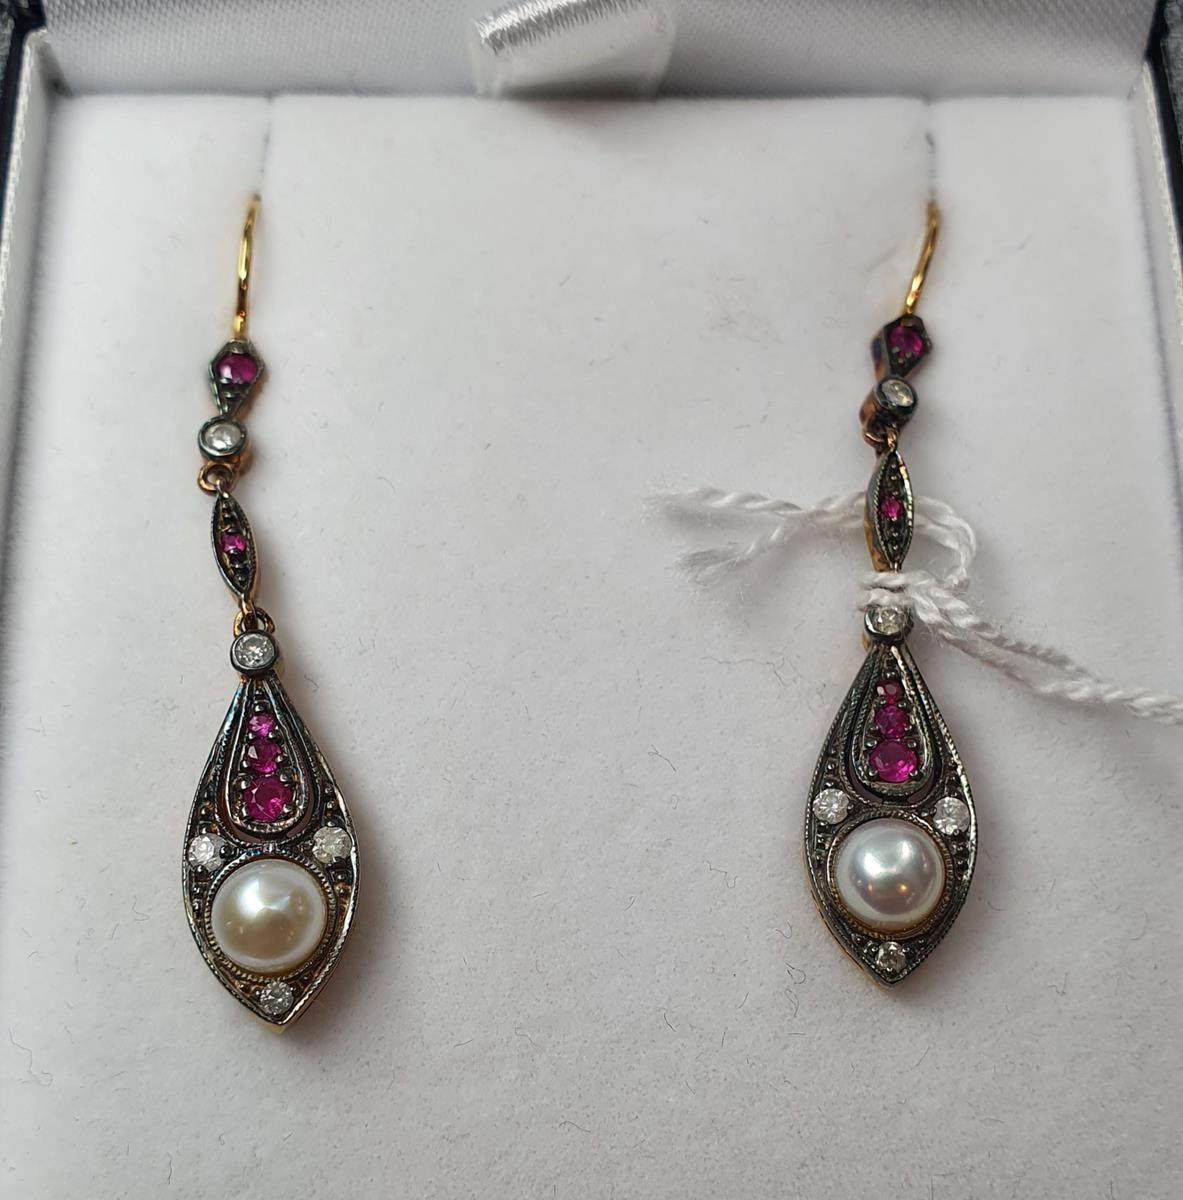 A pair of drop earrings set with rubies, diamonds and pearls - Image 4 of 4